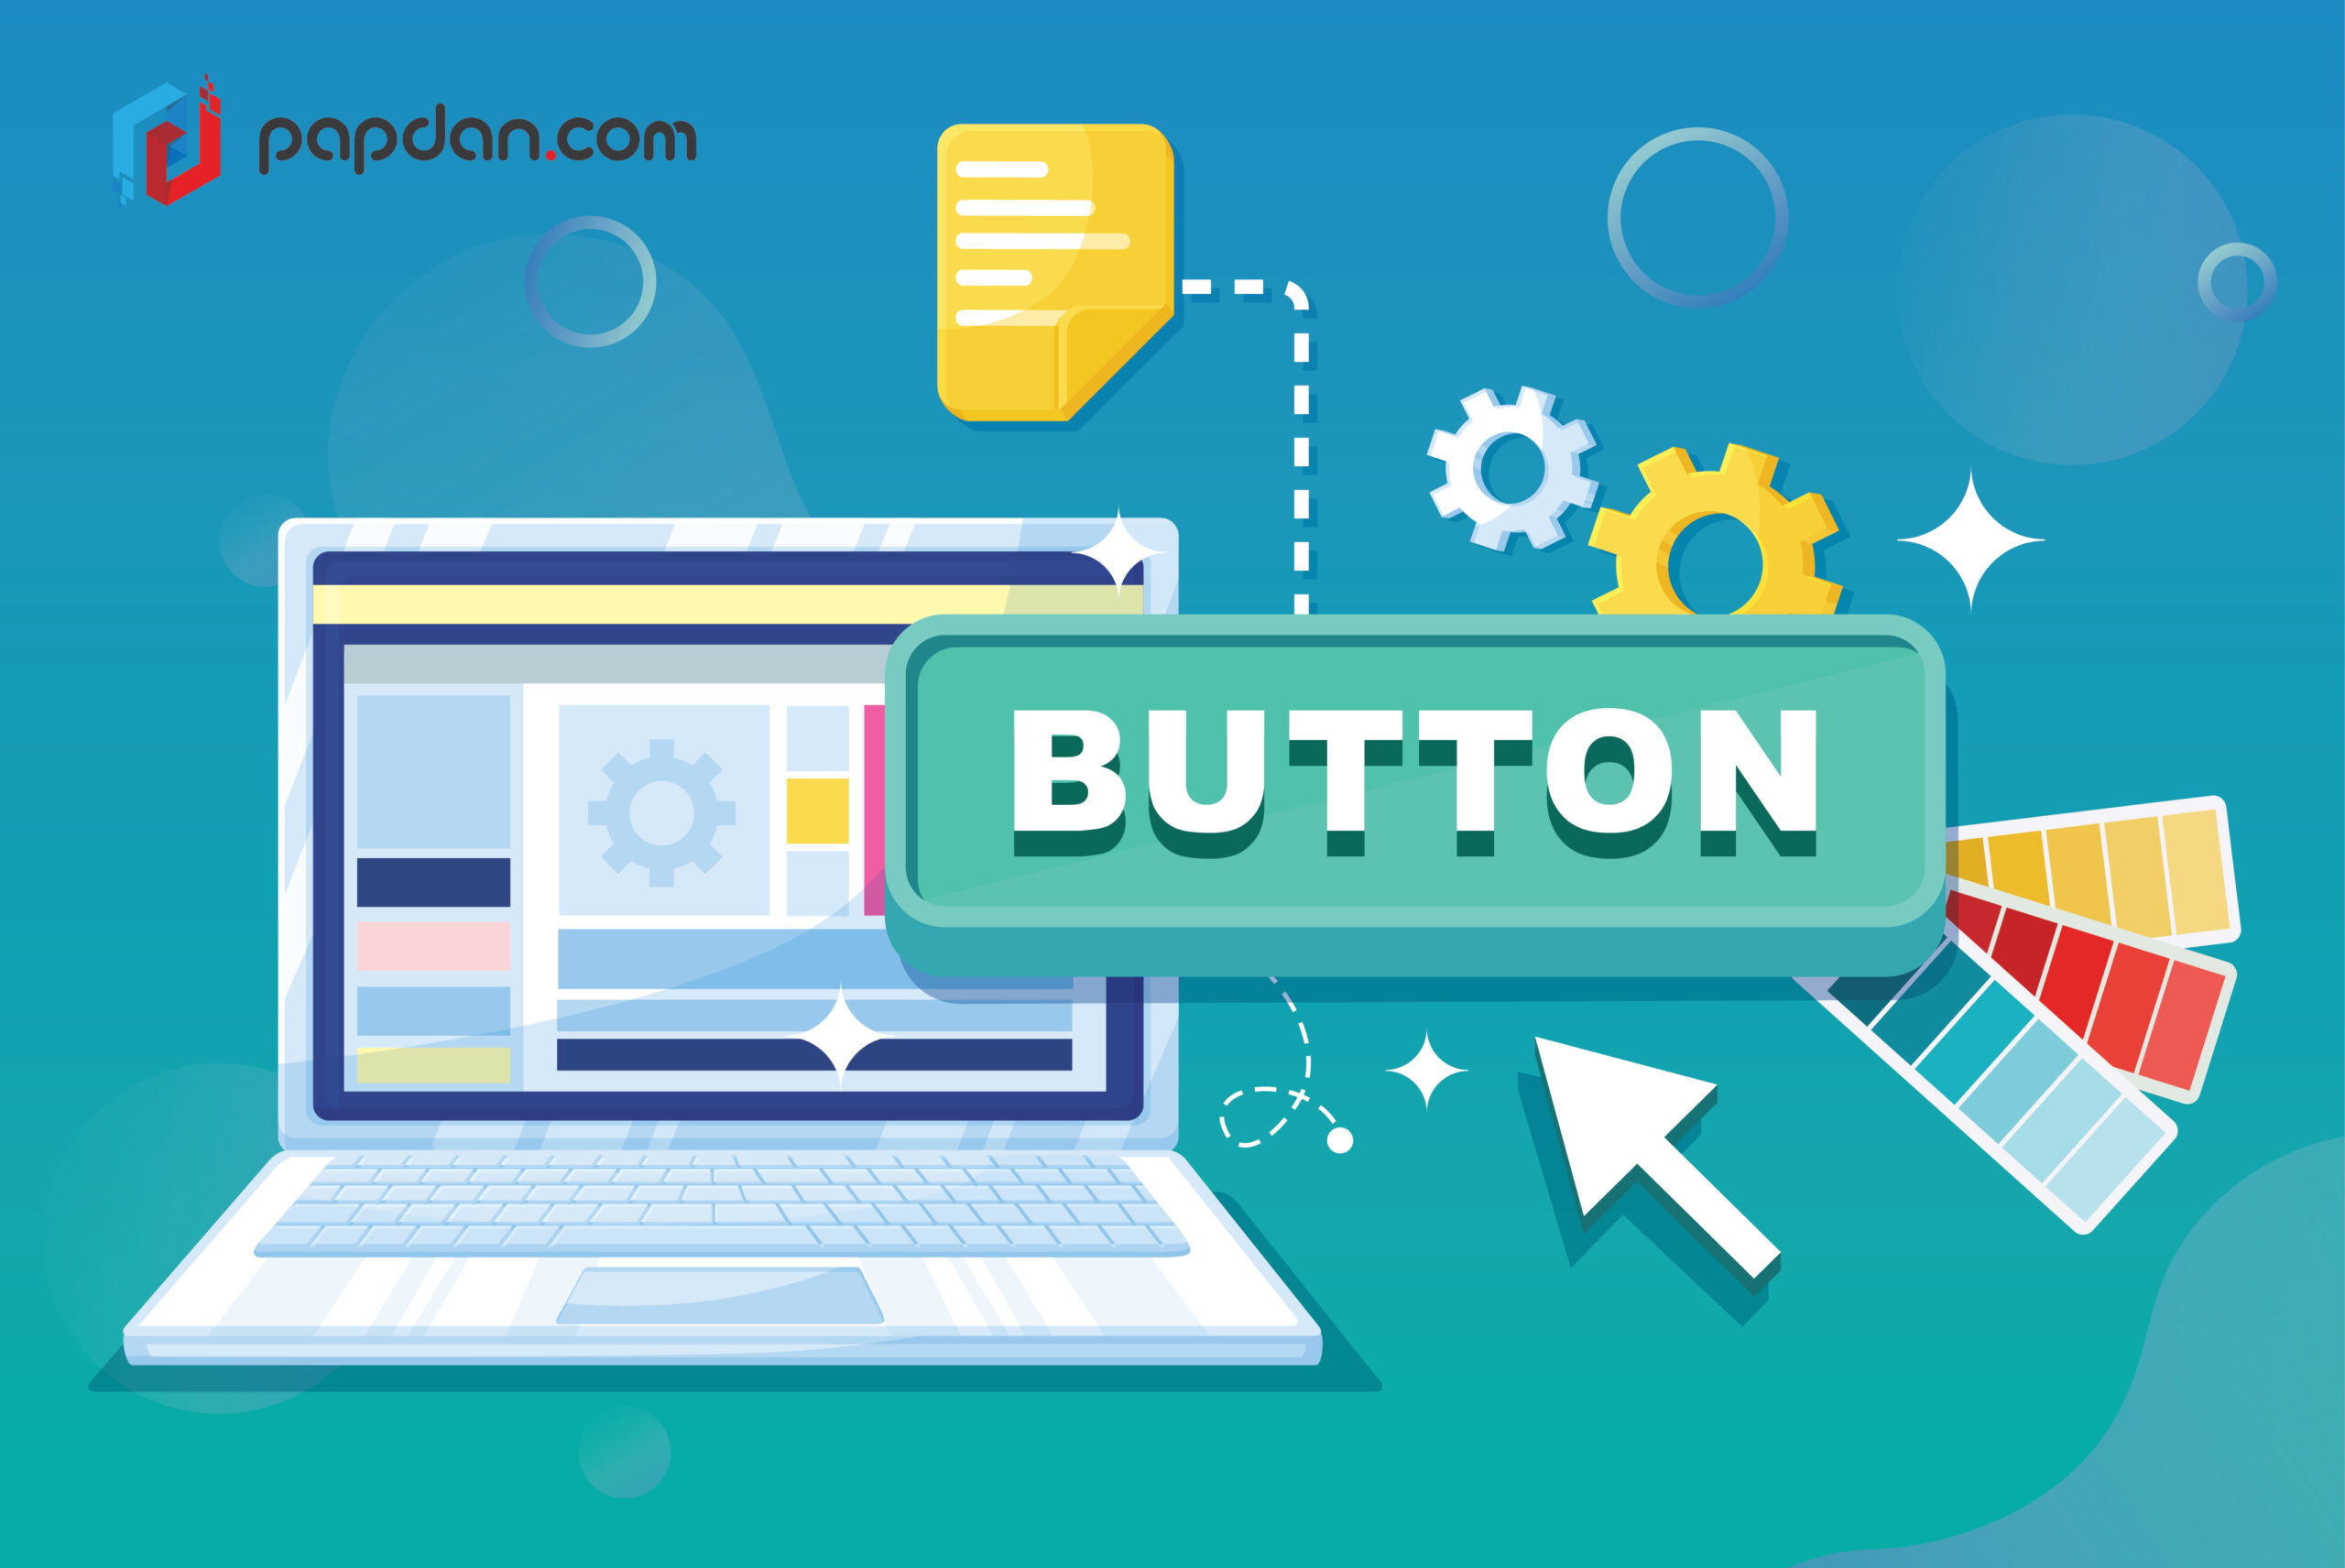 A Pressing Matter: 4 Tips for Crafting Better Buttons